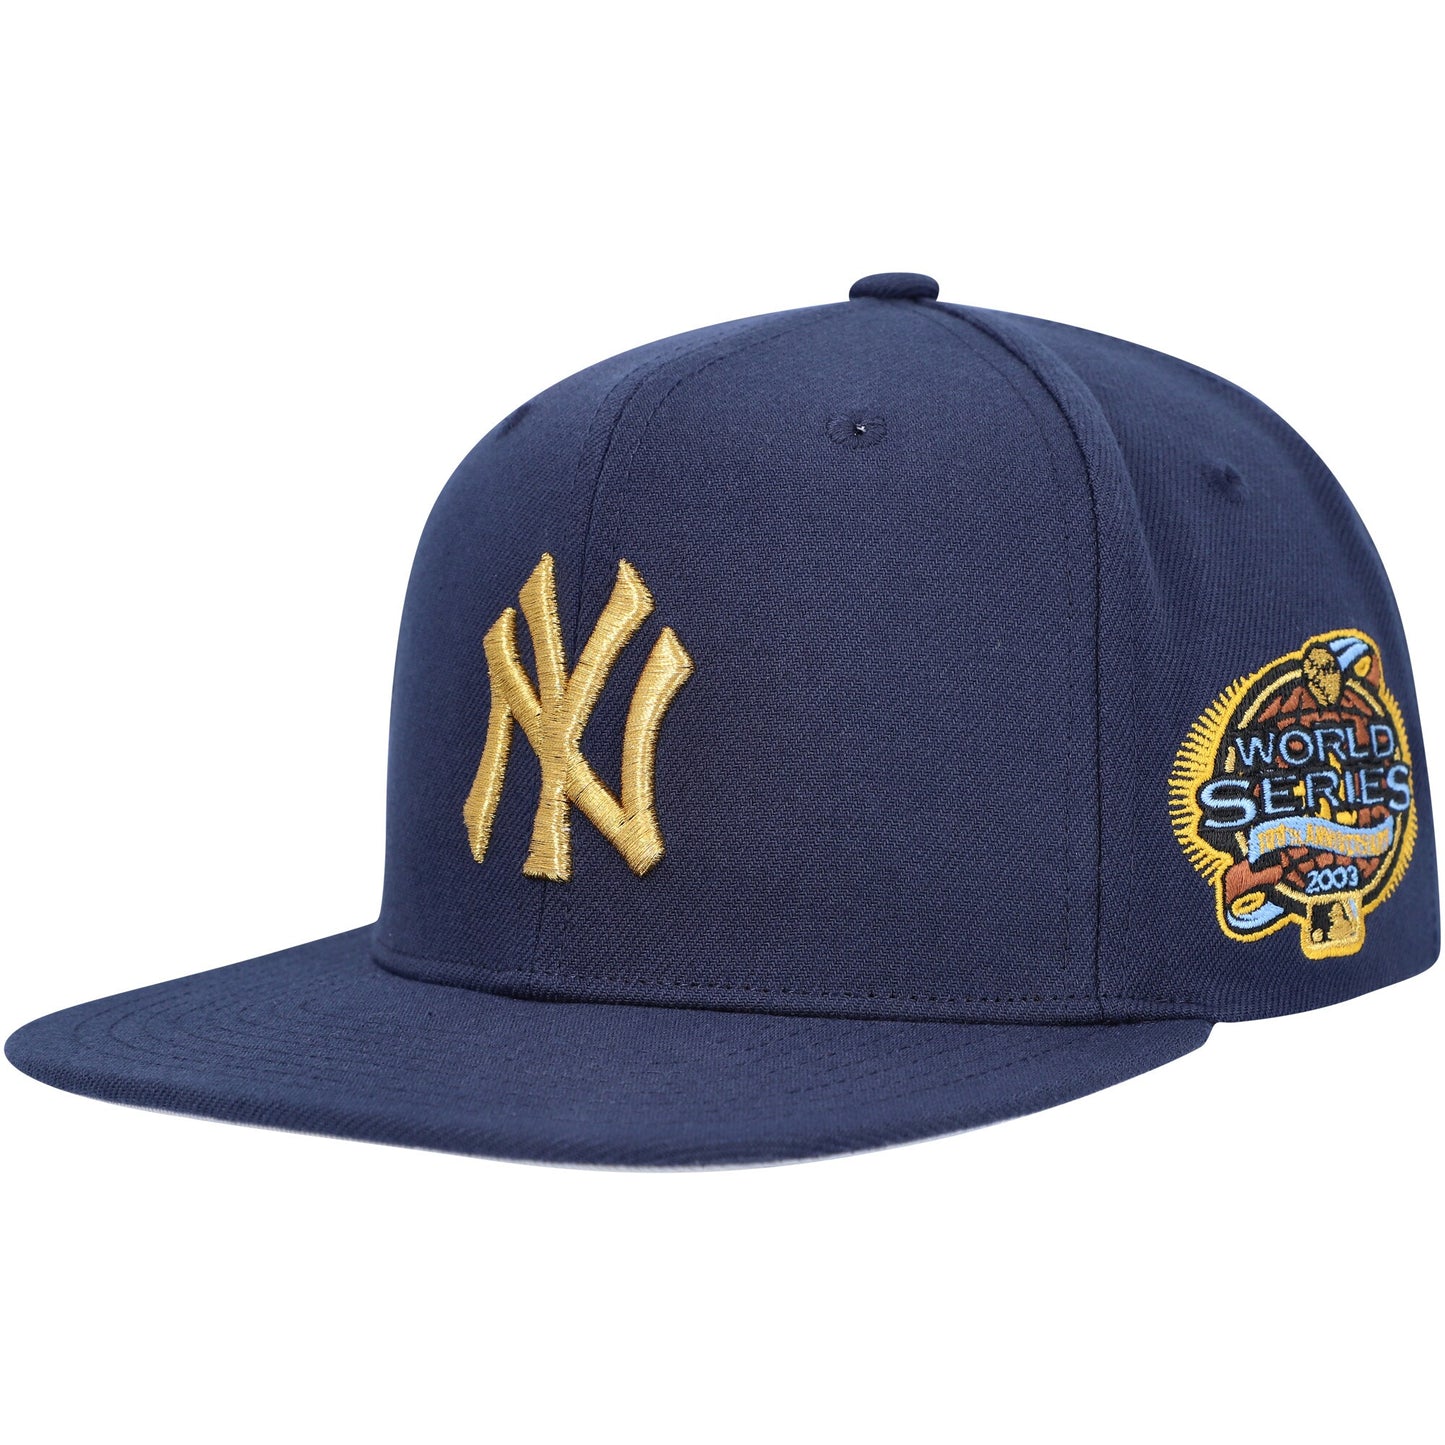 New York Yankees Mitchell & Ness Champ'd Up Snapback Hat - Navy